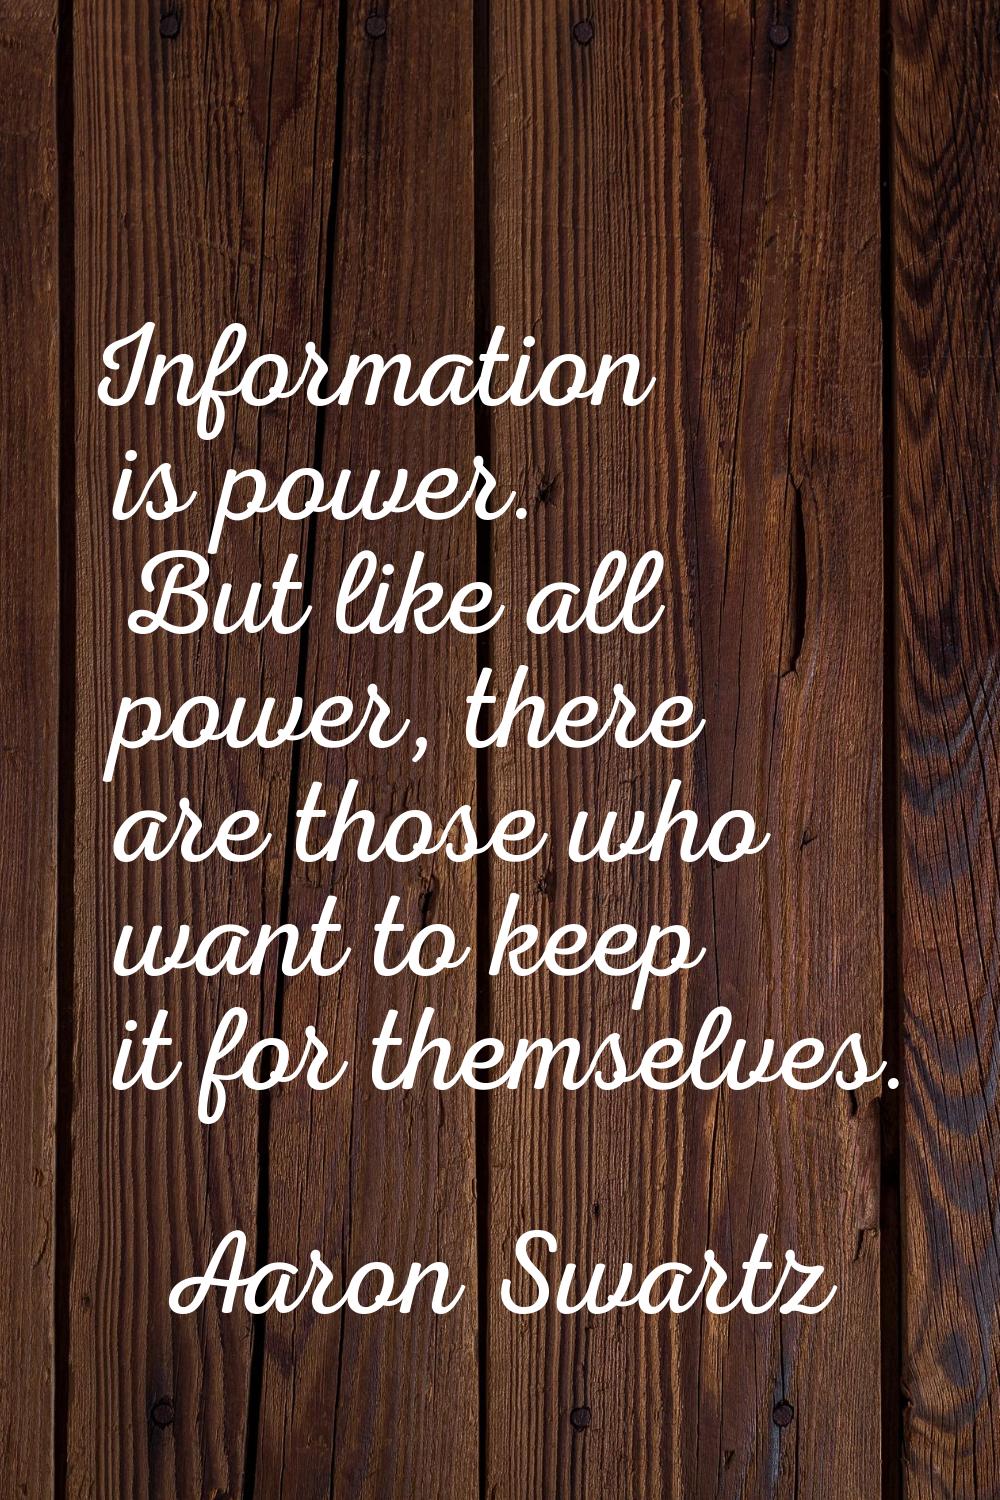 Information is power. But like all power, there are those who want to keep it for themselves.